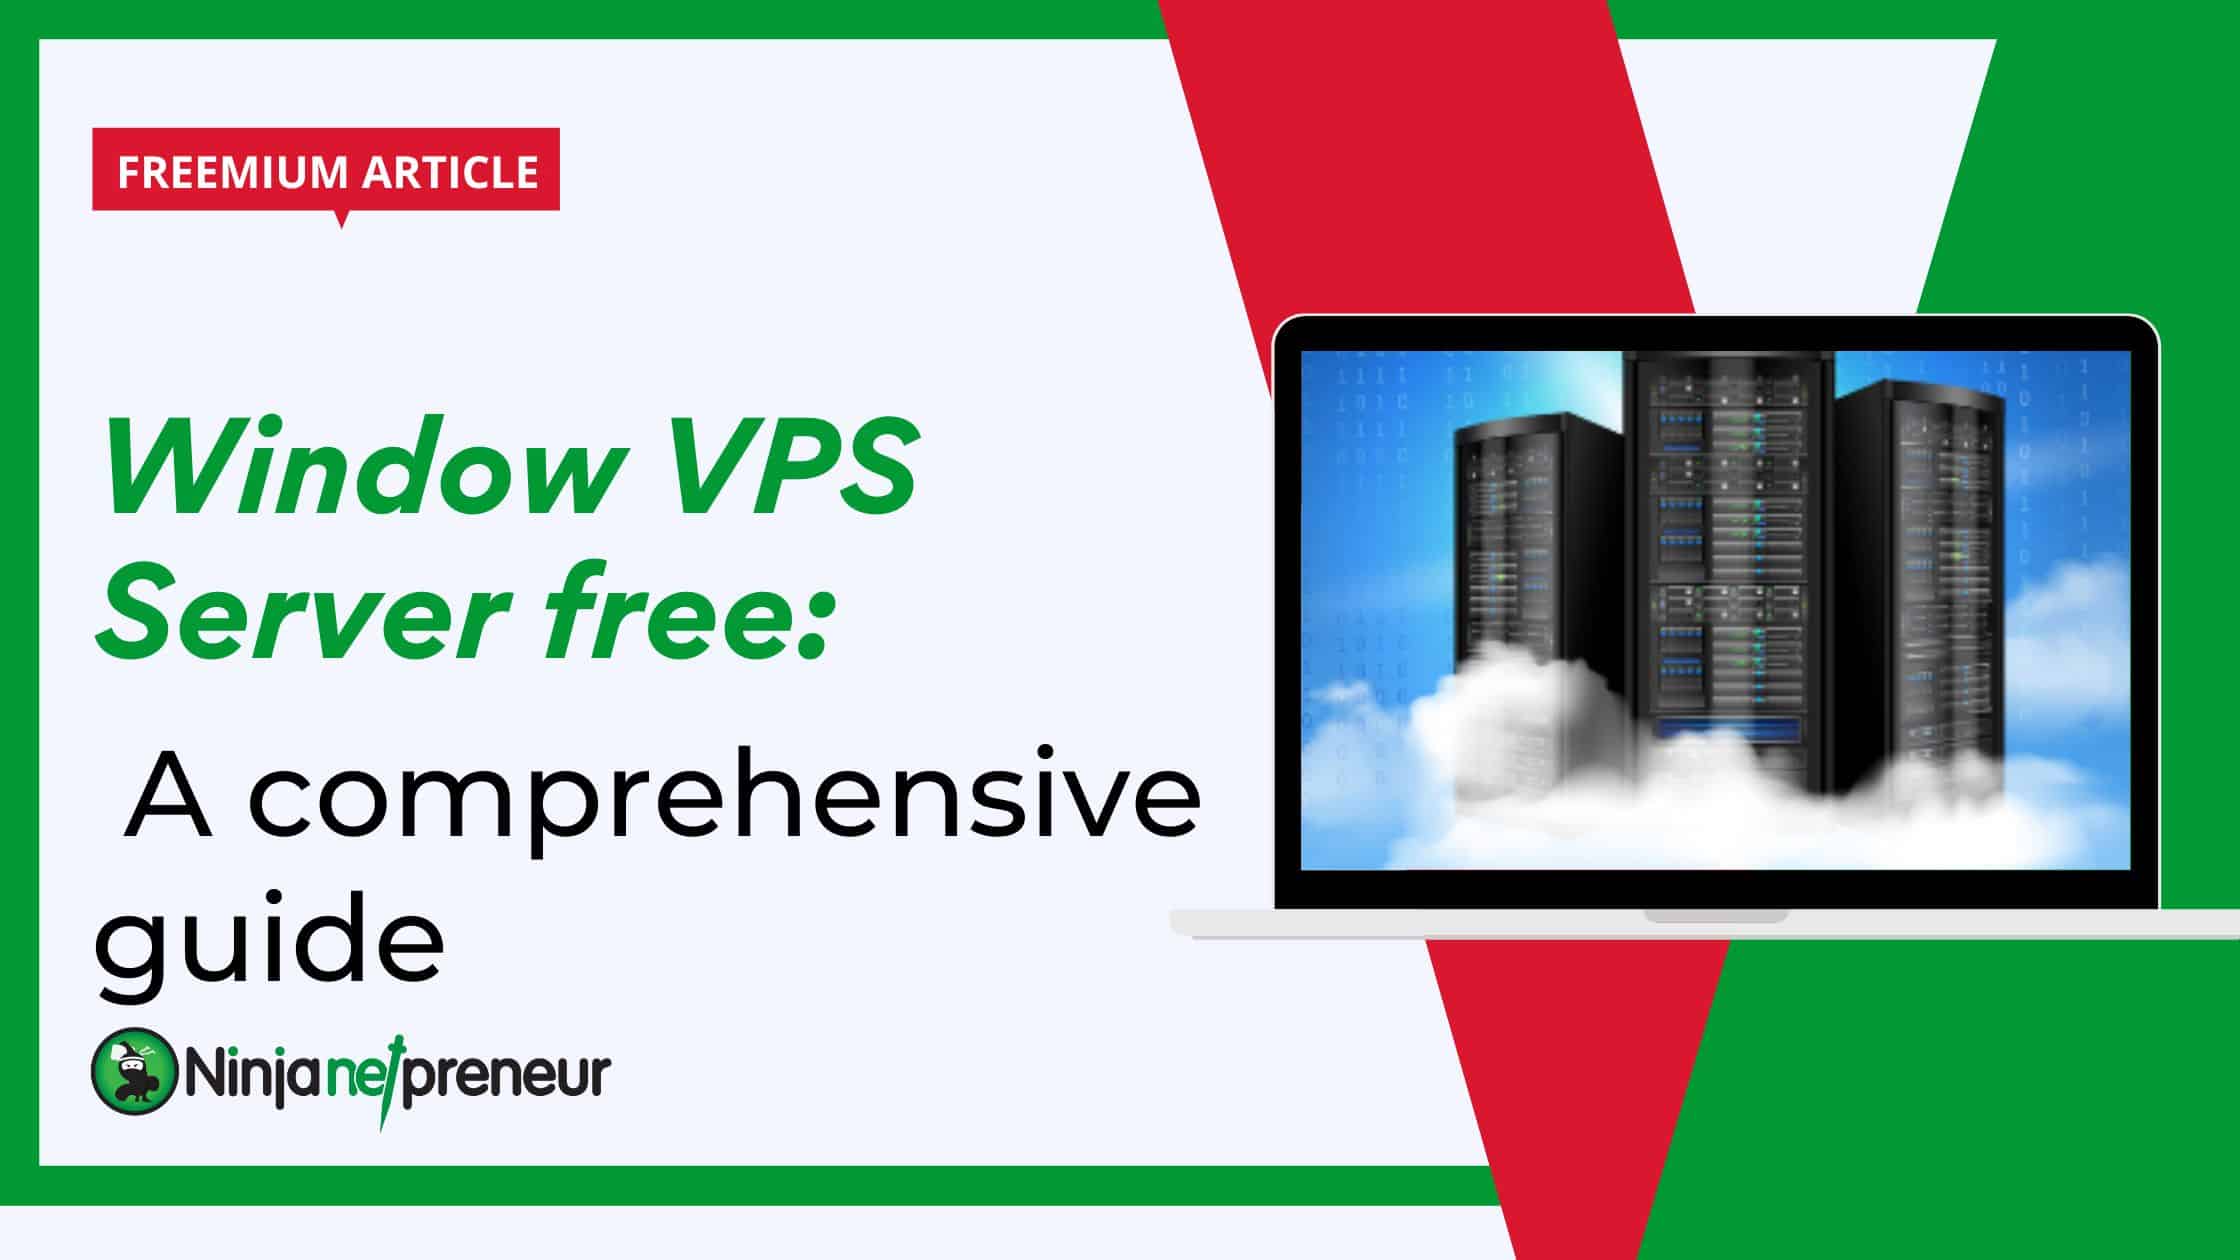 The 5 Windows VPS Server Free: A Comprehensive Guide